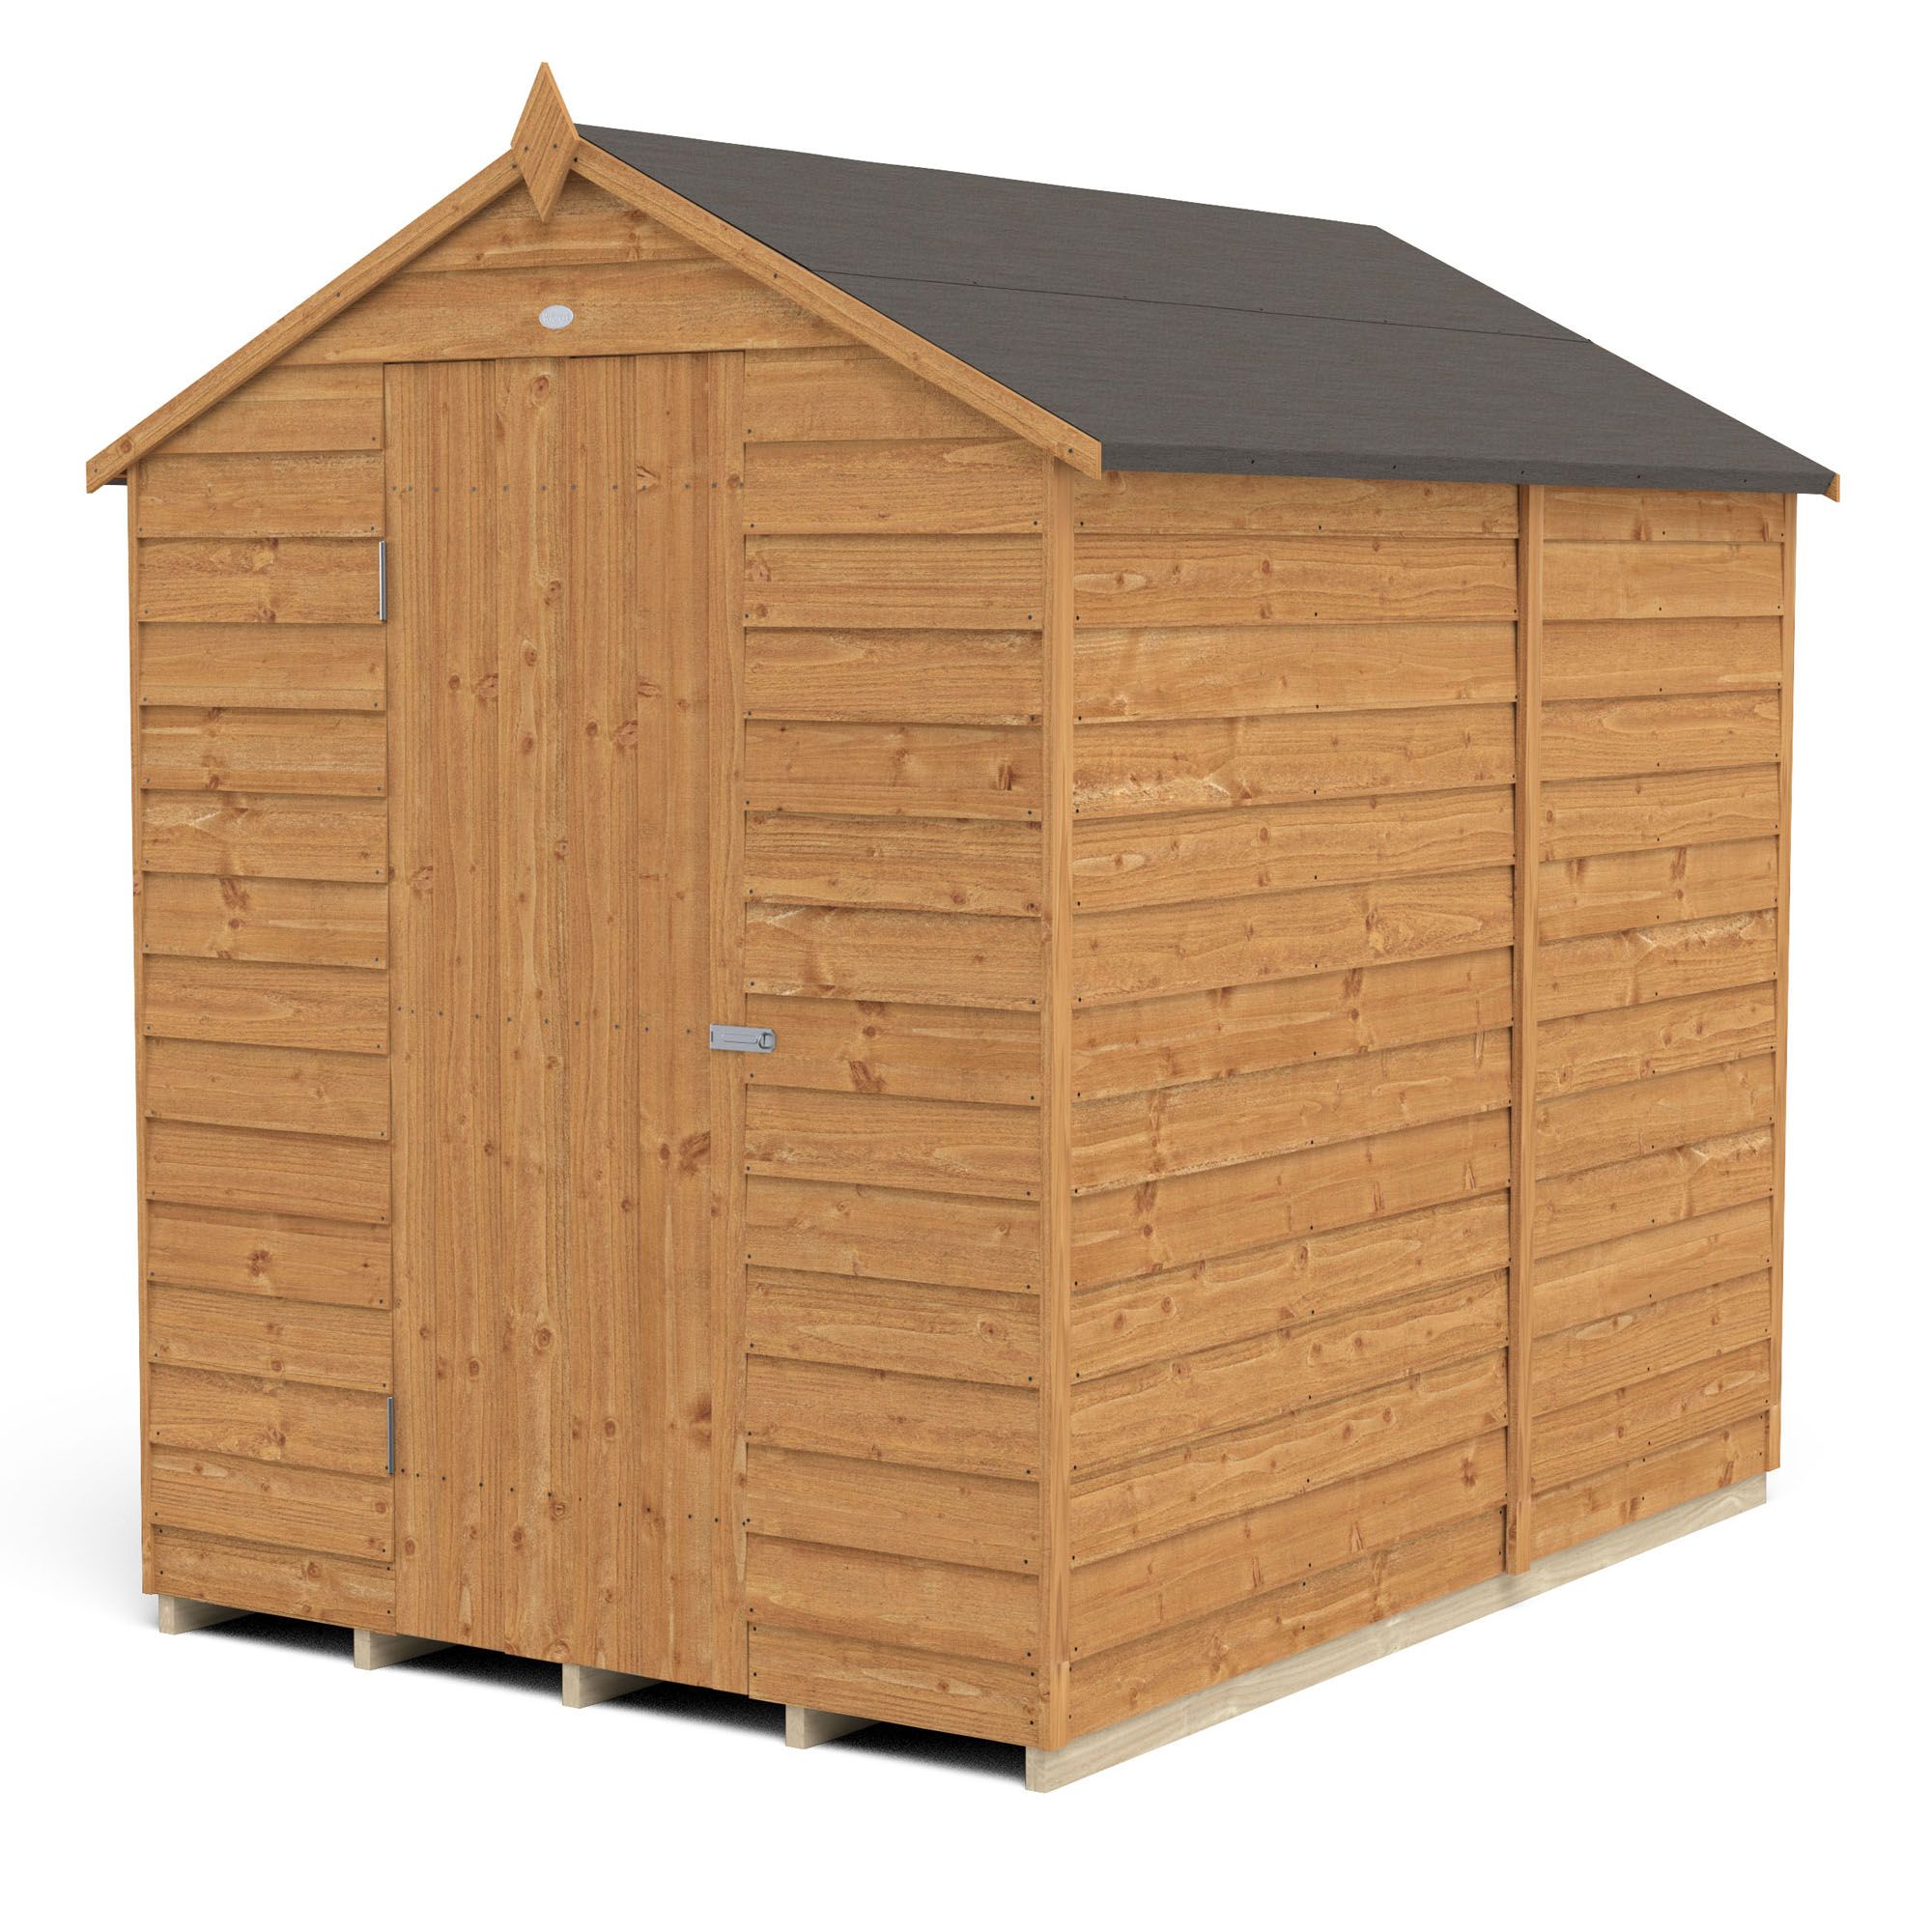 Forest Garden Overlap 7x5 ft Apex Wooden Dip treated Shed with floor